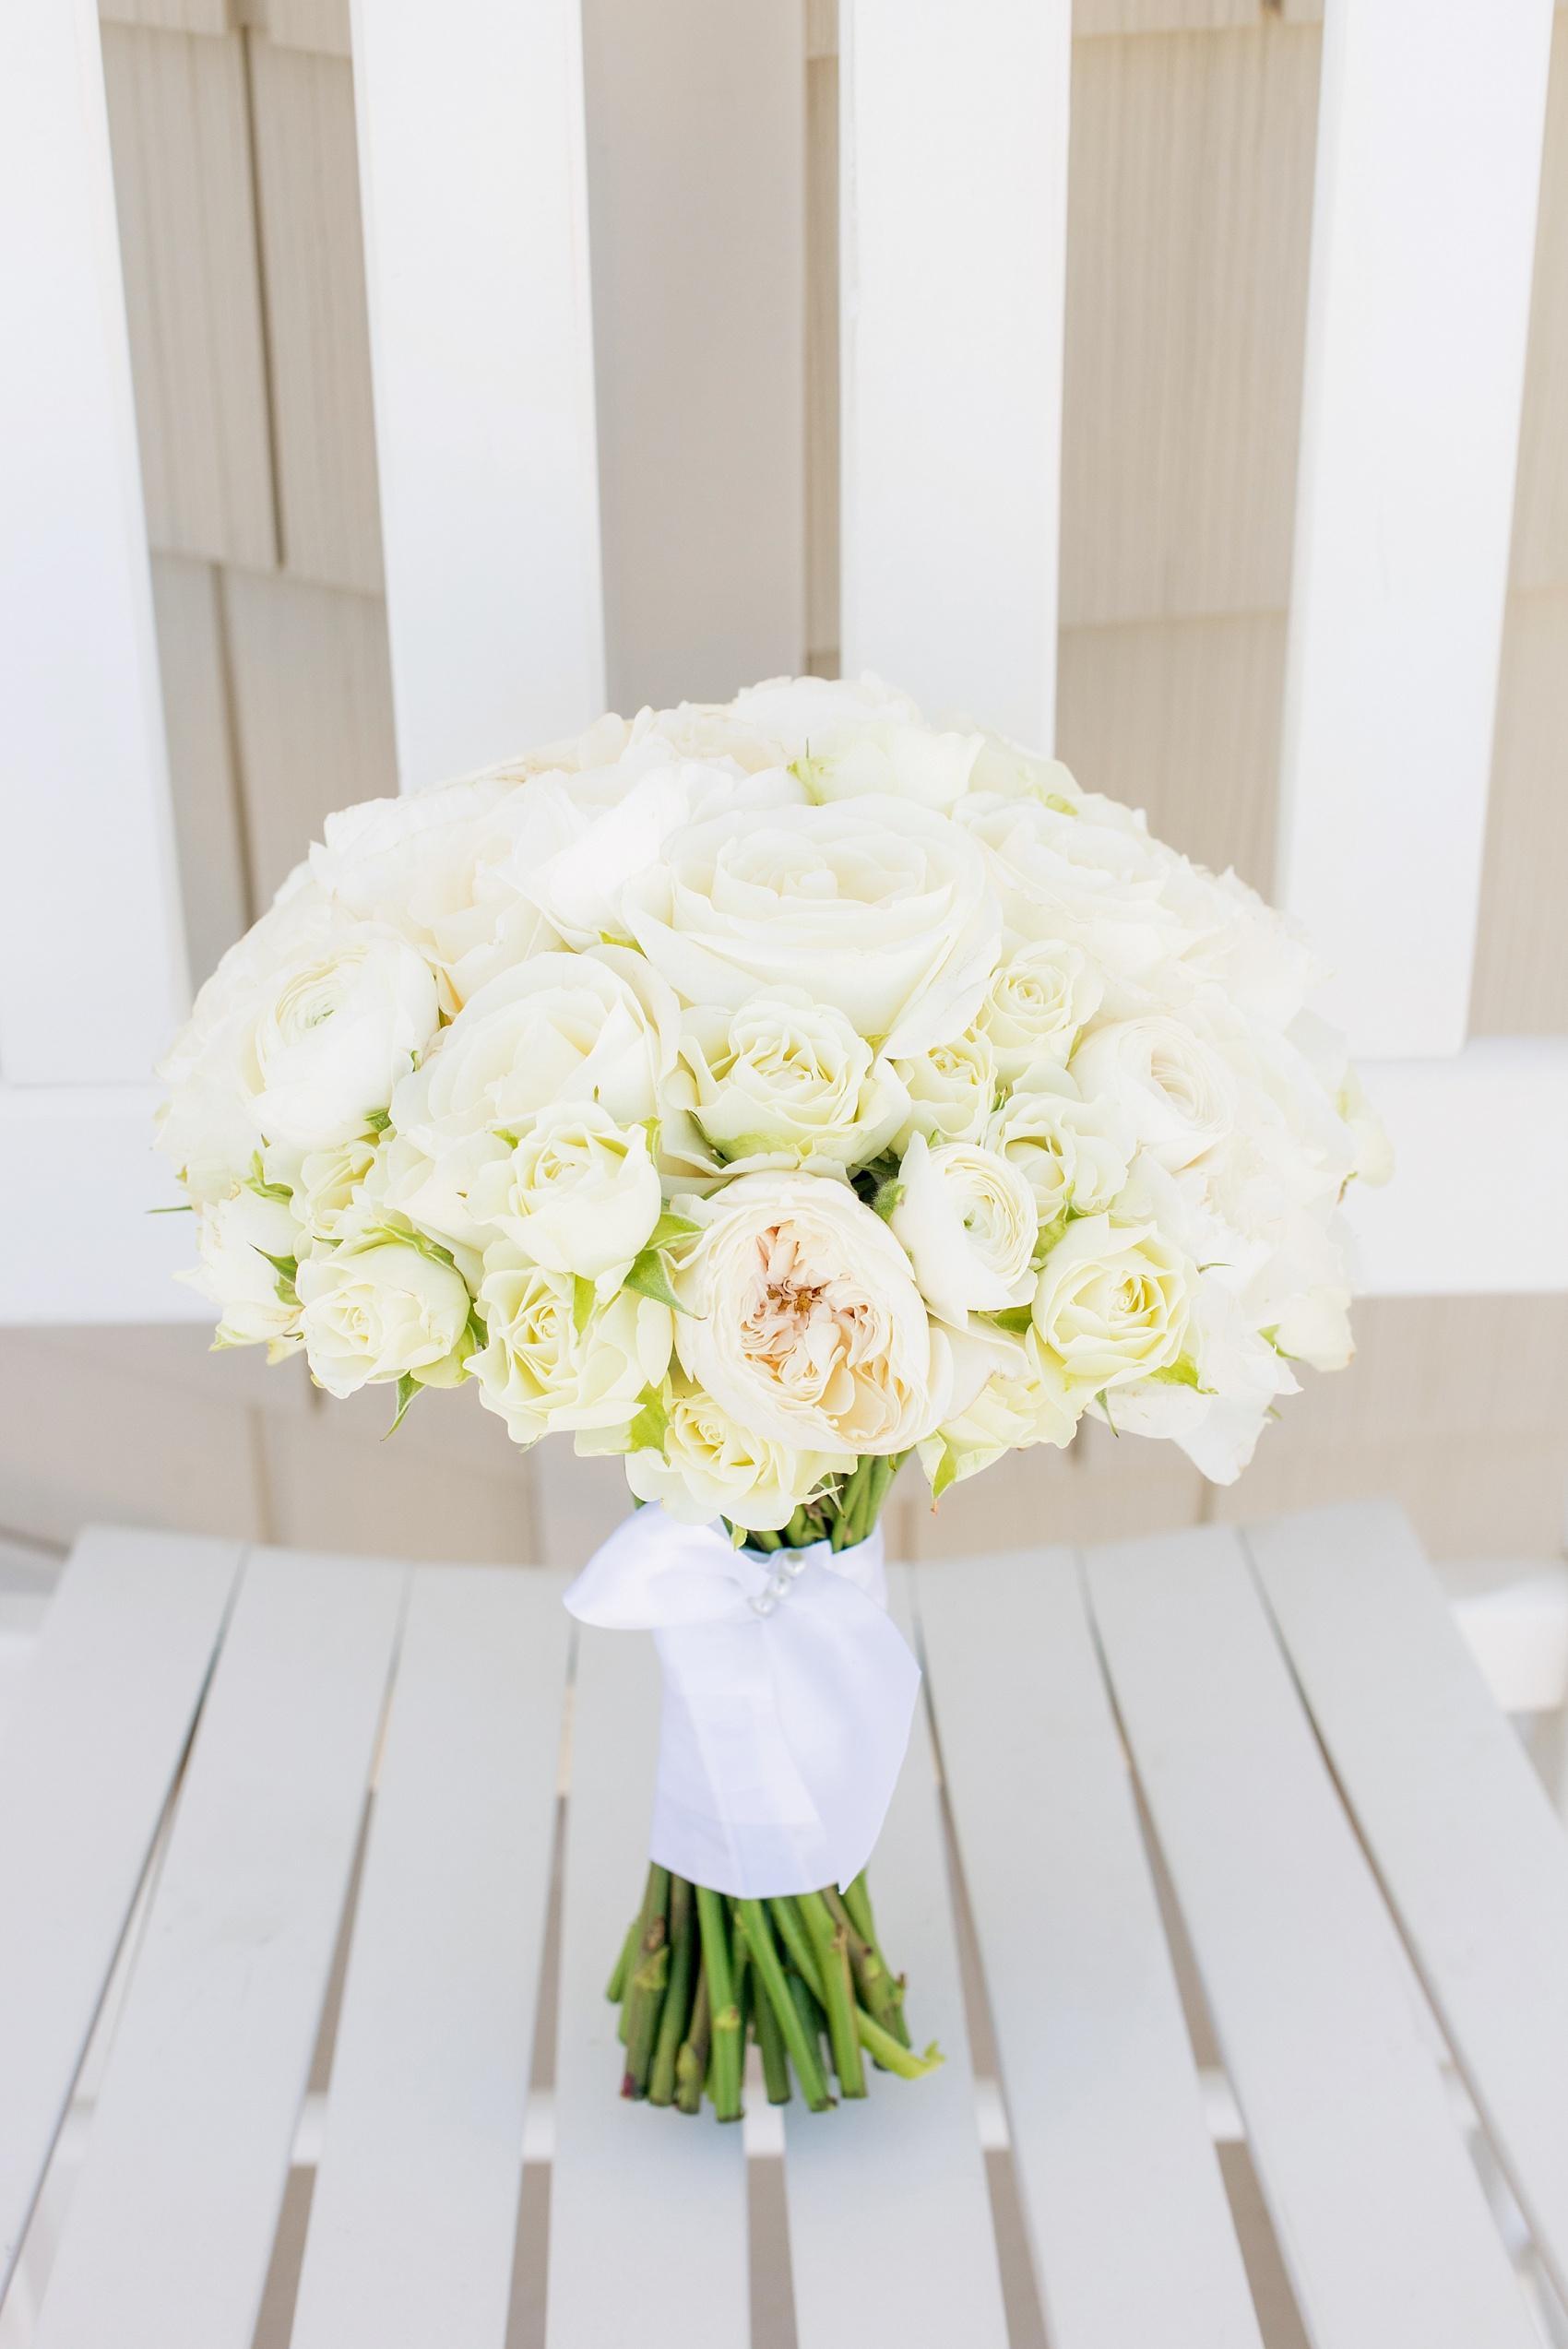 Photo by Mikkel Paige photography. Bride's bouquet of all white garden roses for her beach nuptials.